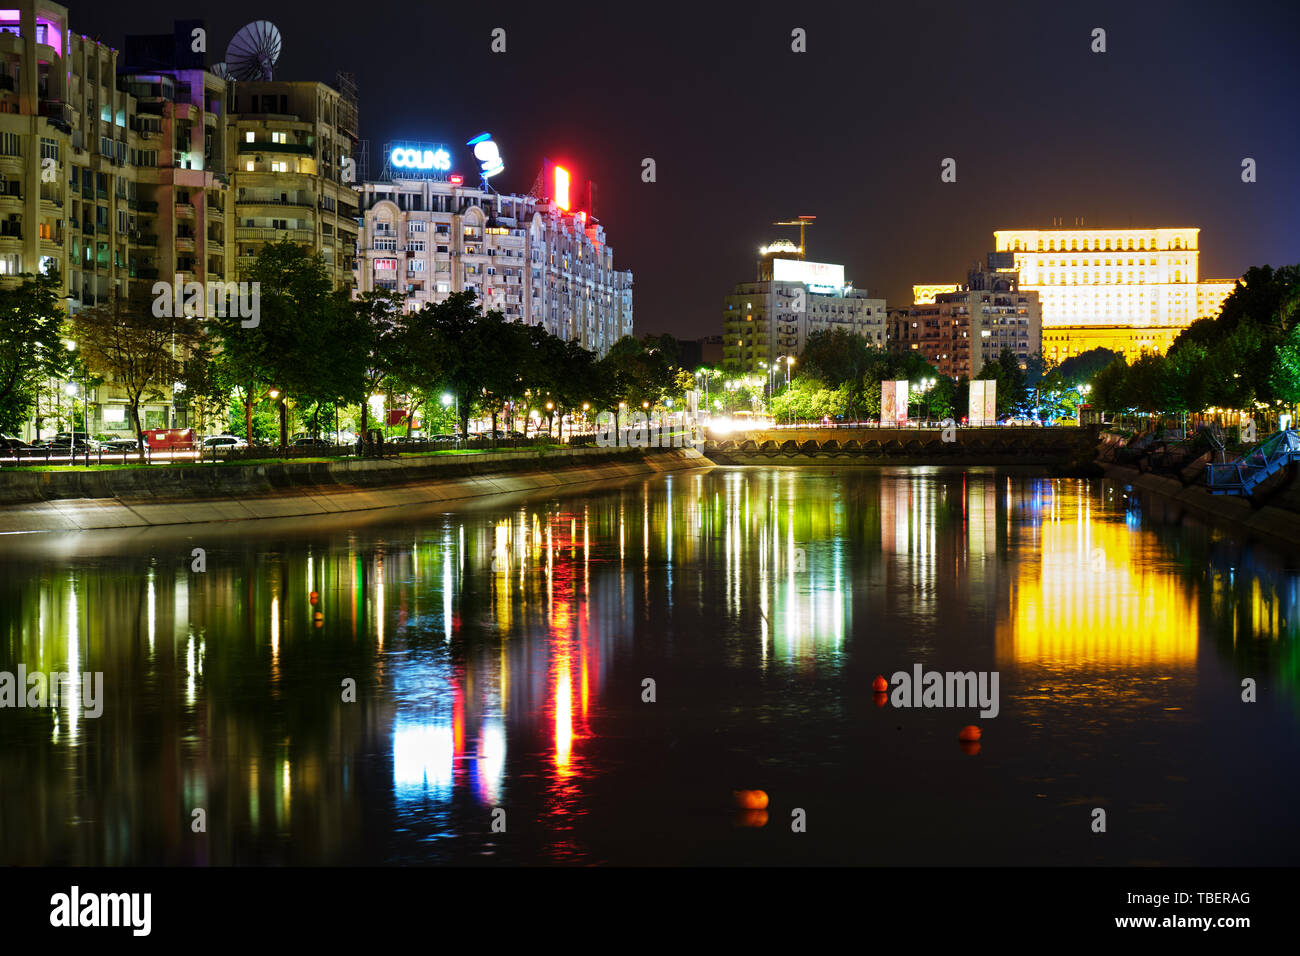 Bucharest, Romania - May 09, 2019: Palace of Parliament reflected in Dambovita river, at night, with calm waters. Night scene in downtown Bucharest, R Stock Photo